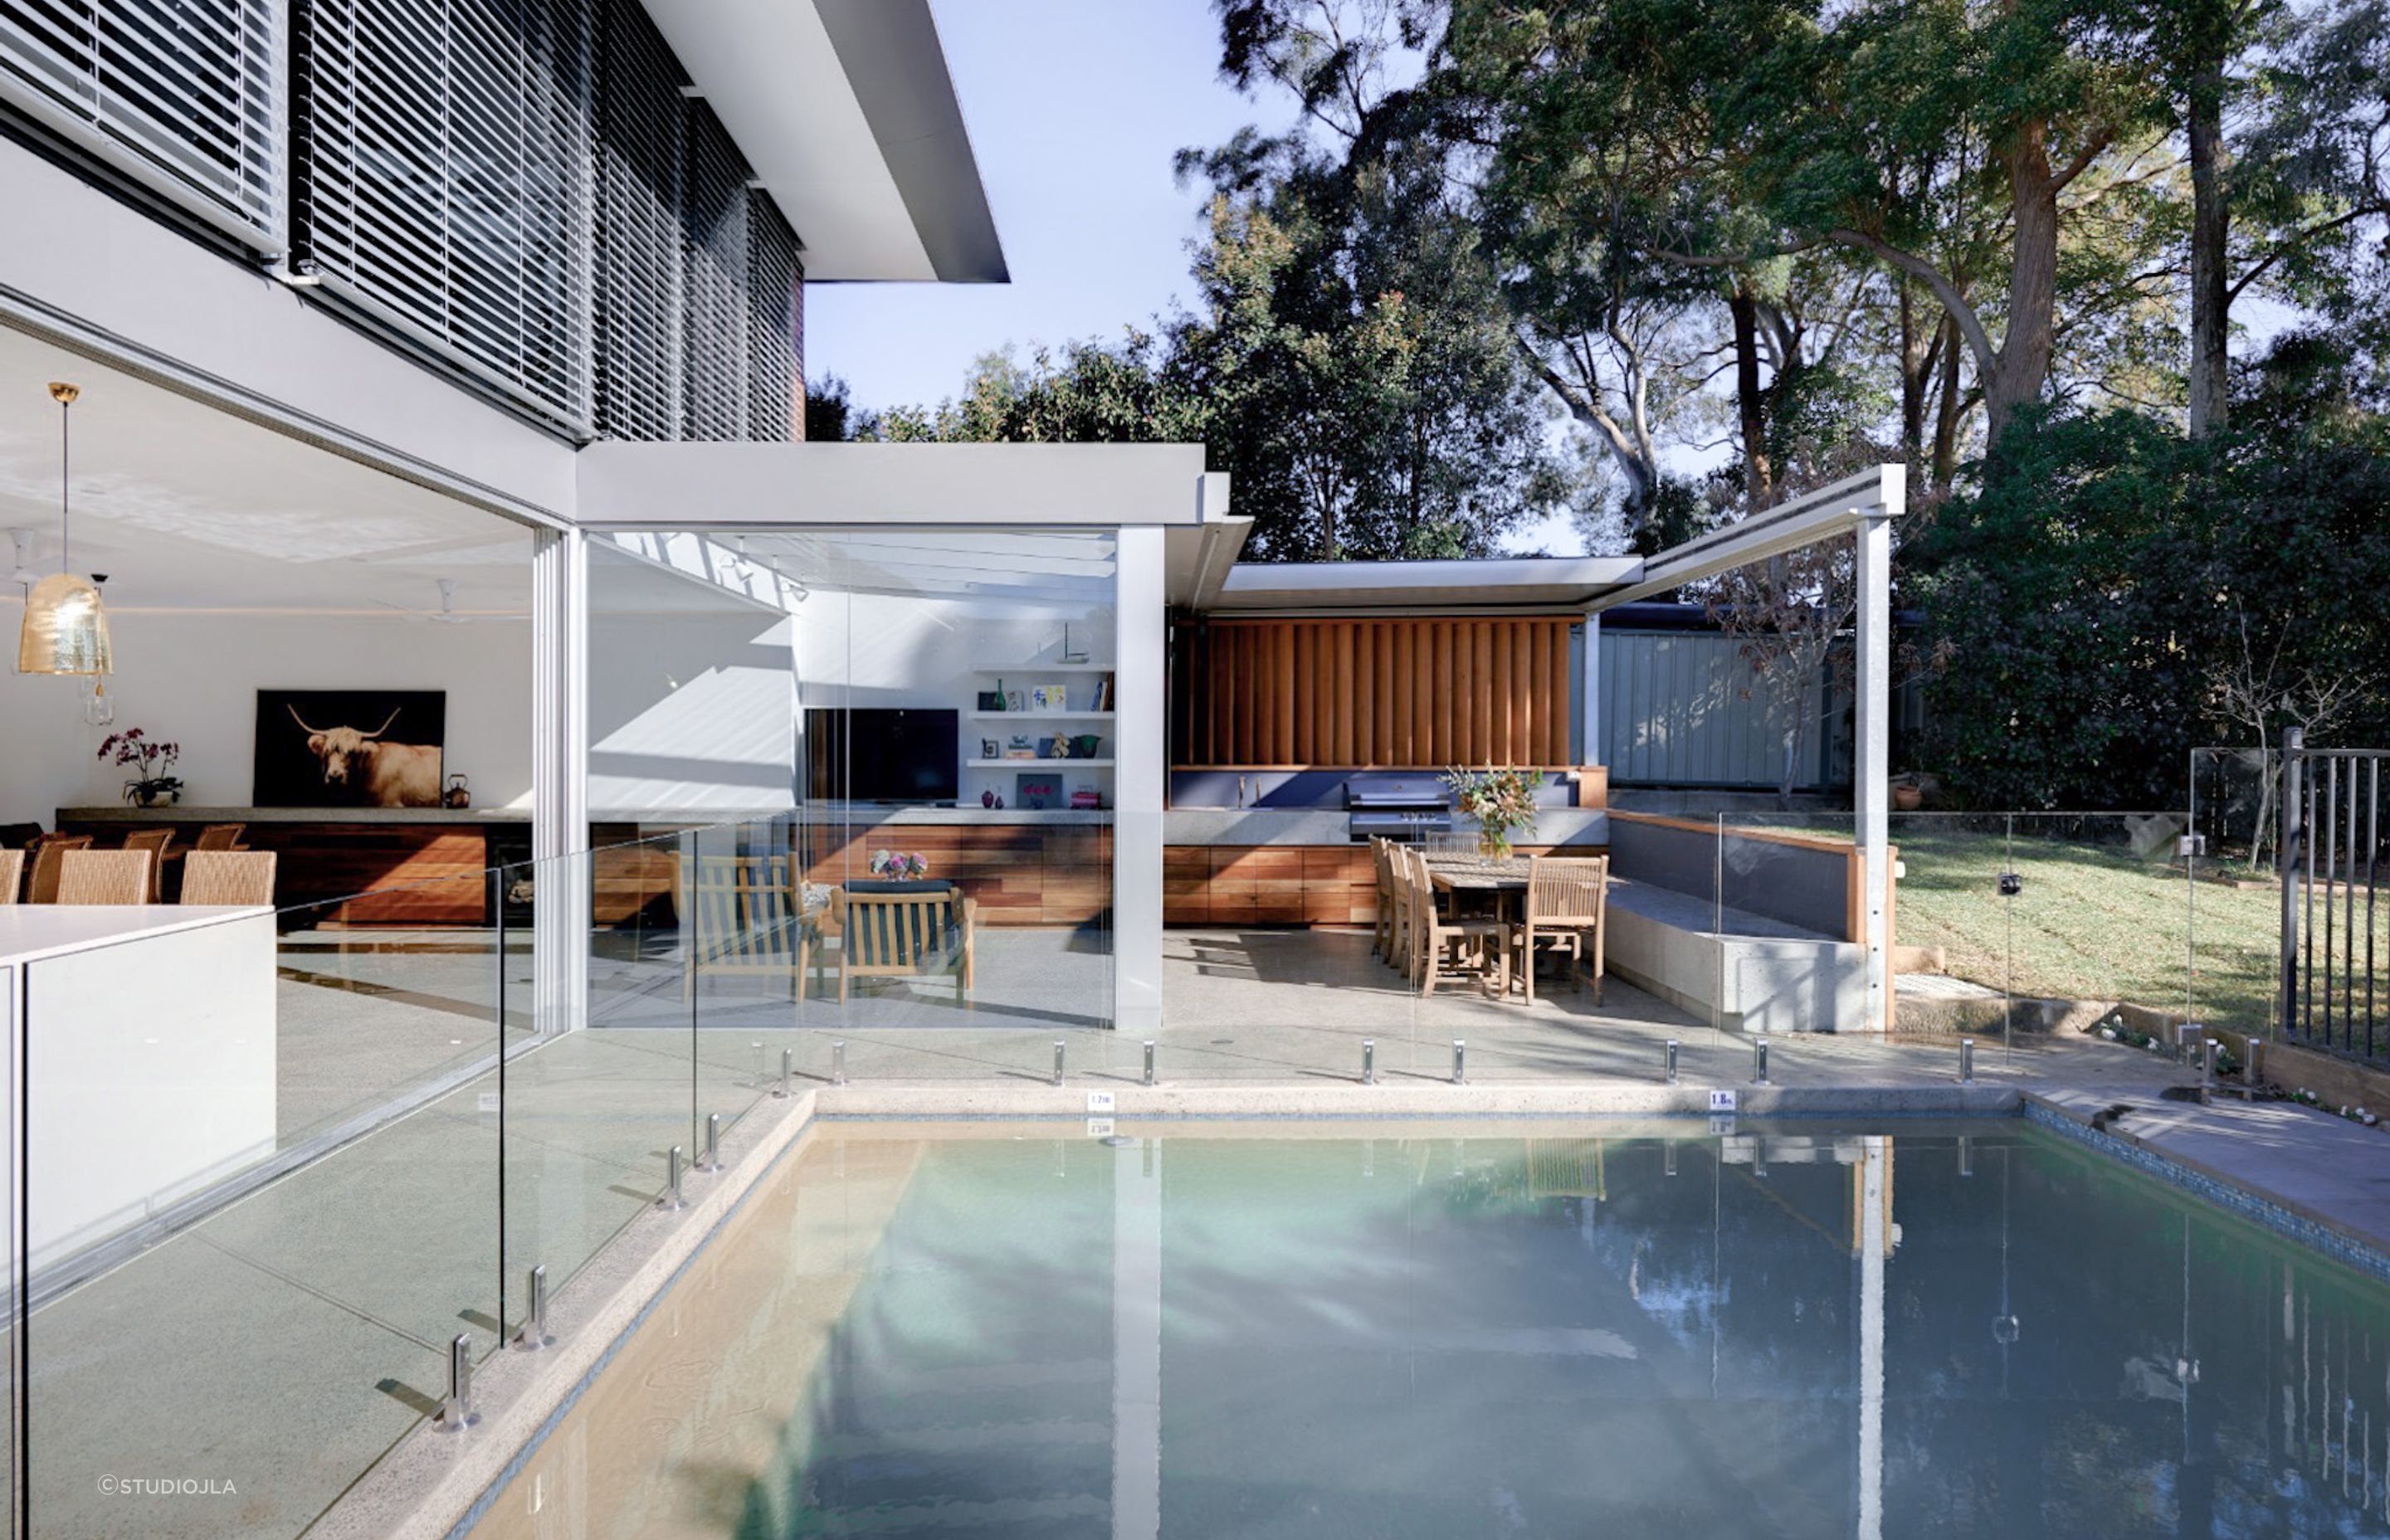 Pool landscaping doesn't always need to focus on plants and greenery, the right out door furniture and materials can lead the design. Featured project: Gladesville House - StudioJLA